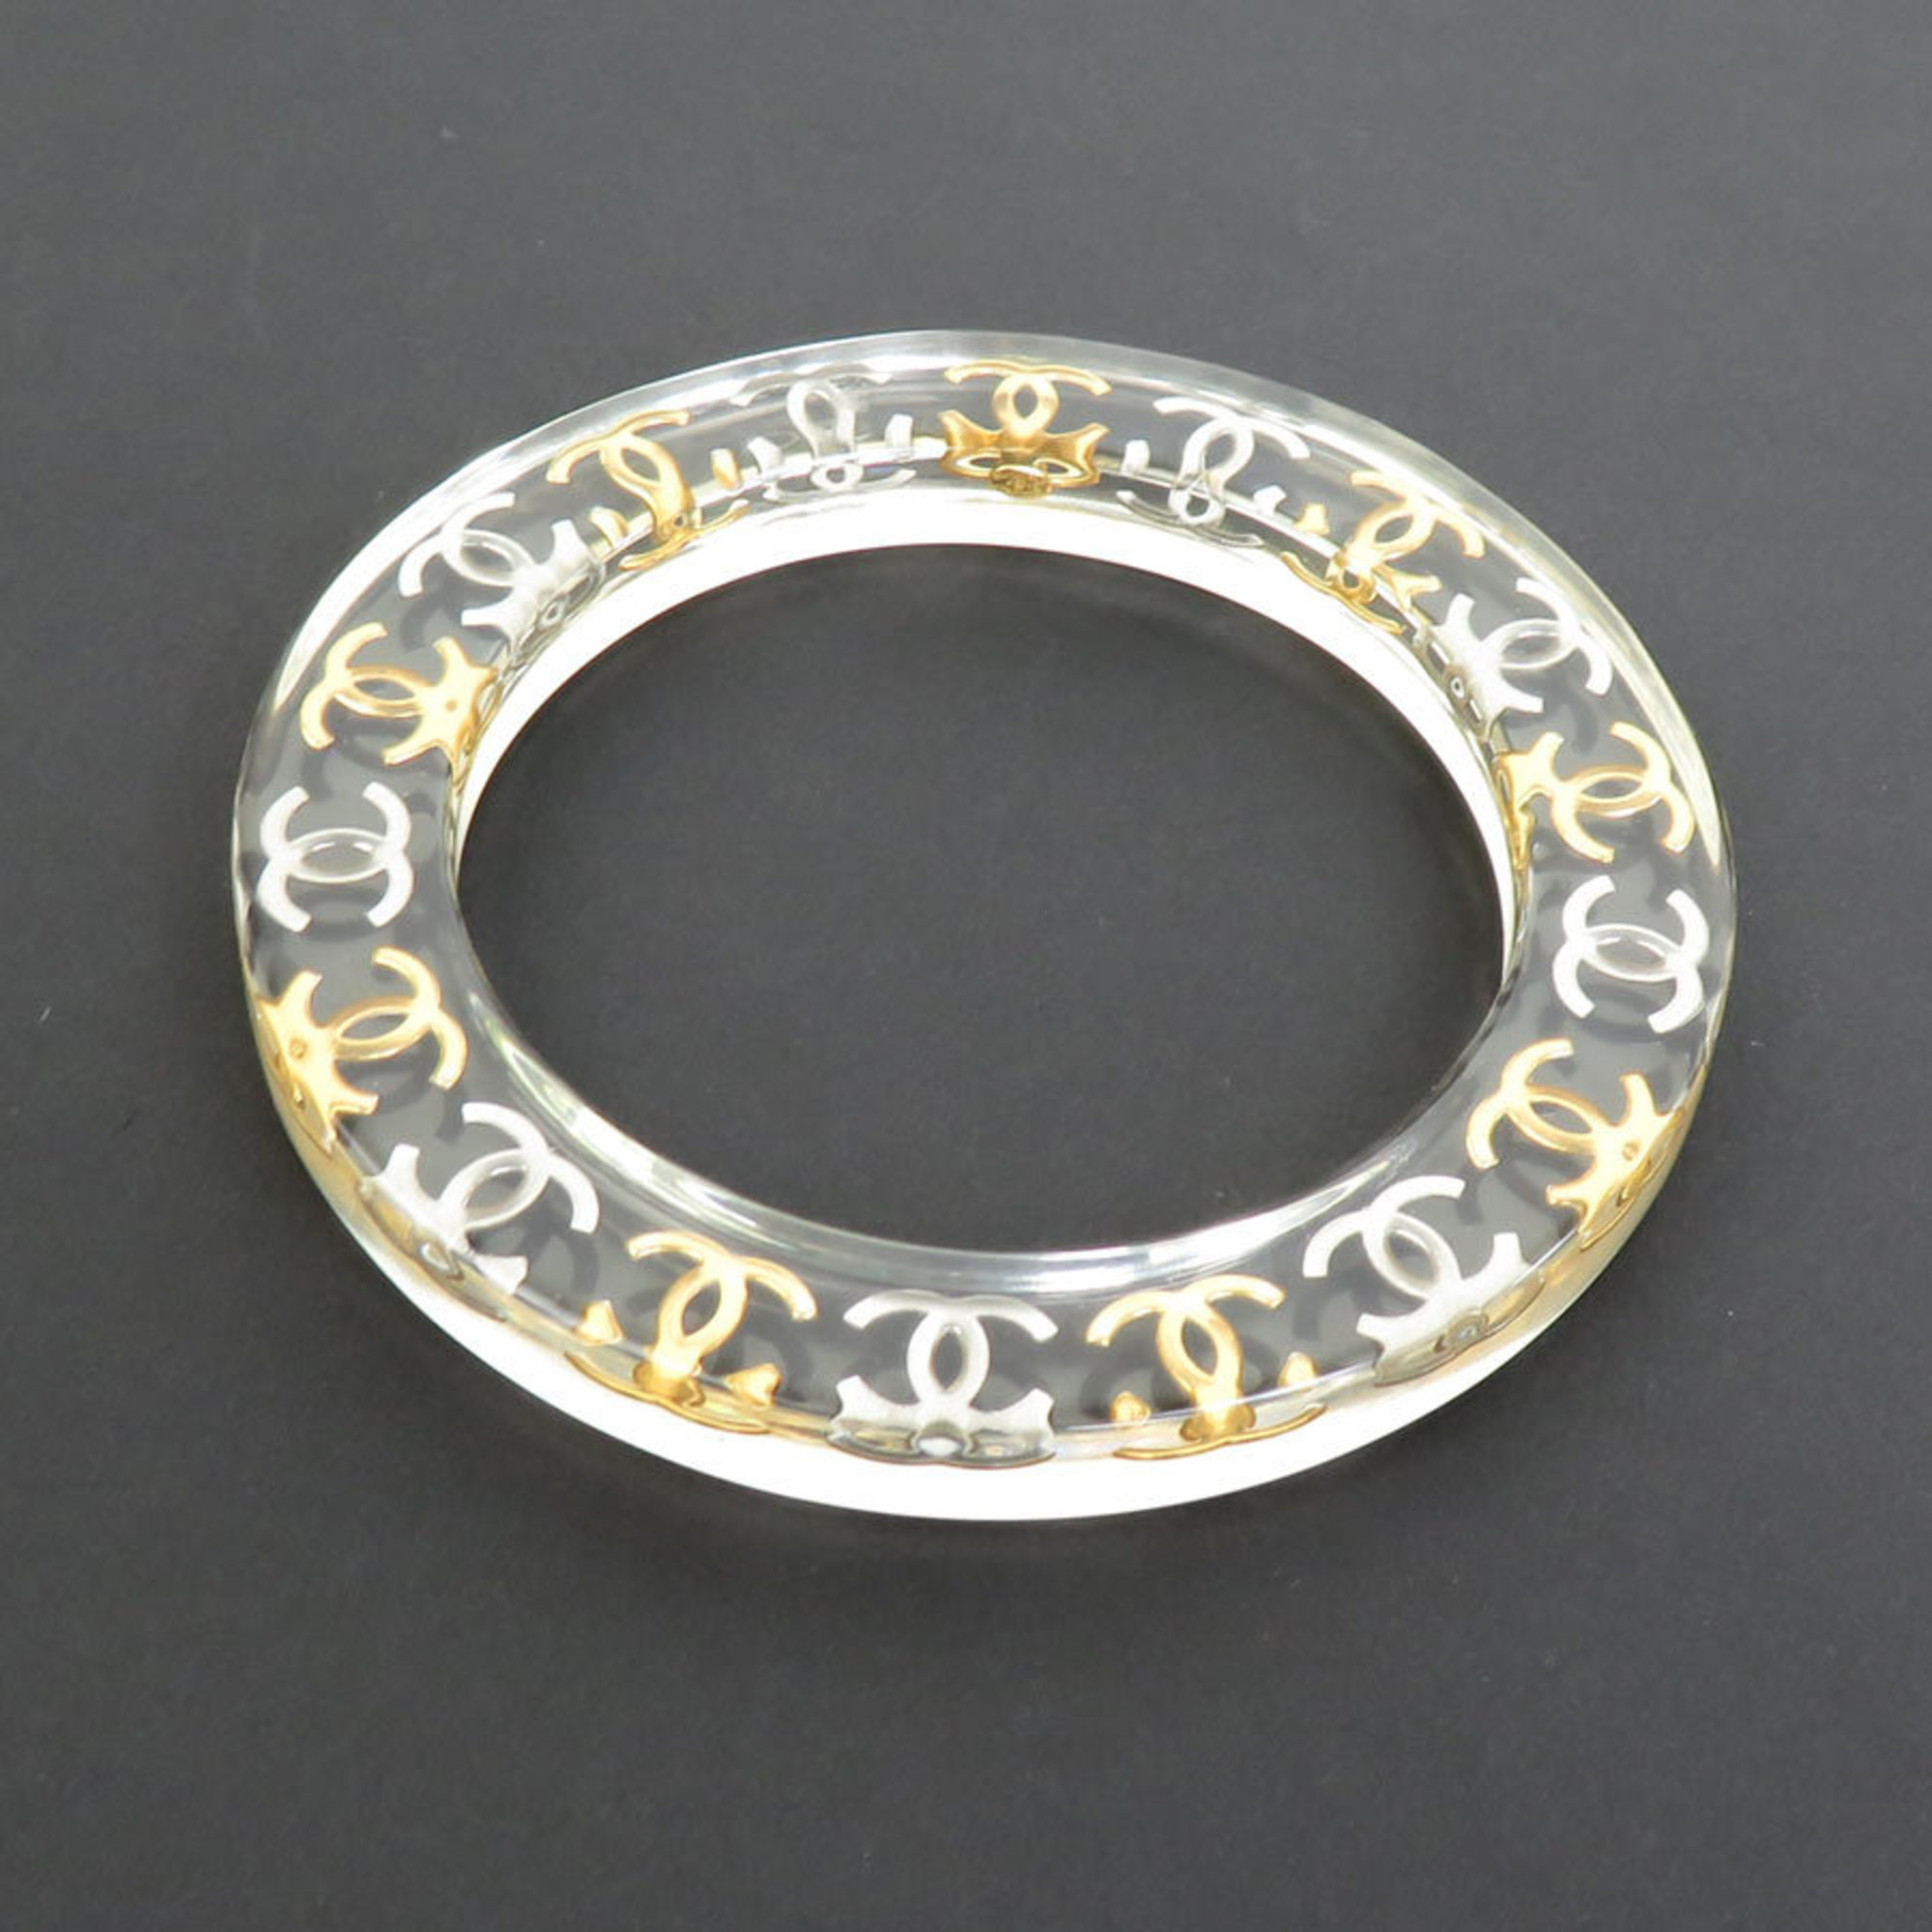 CHANEL bangle bracelet here mark resin/metal clear/gold/silver ladies